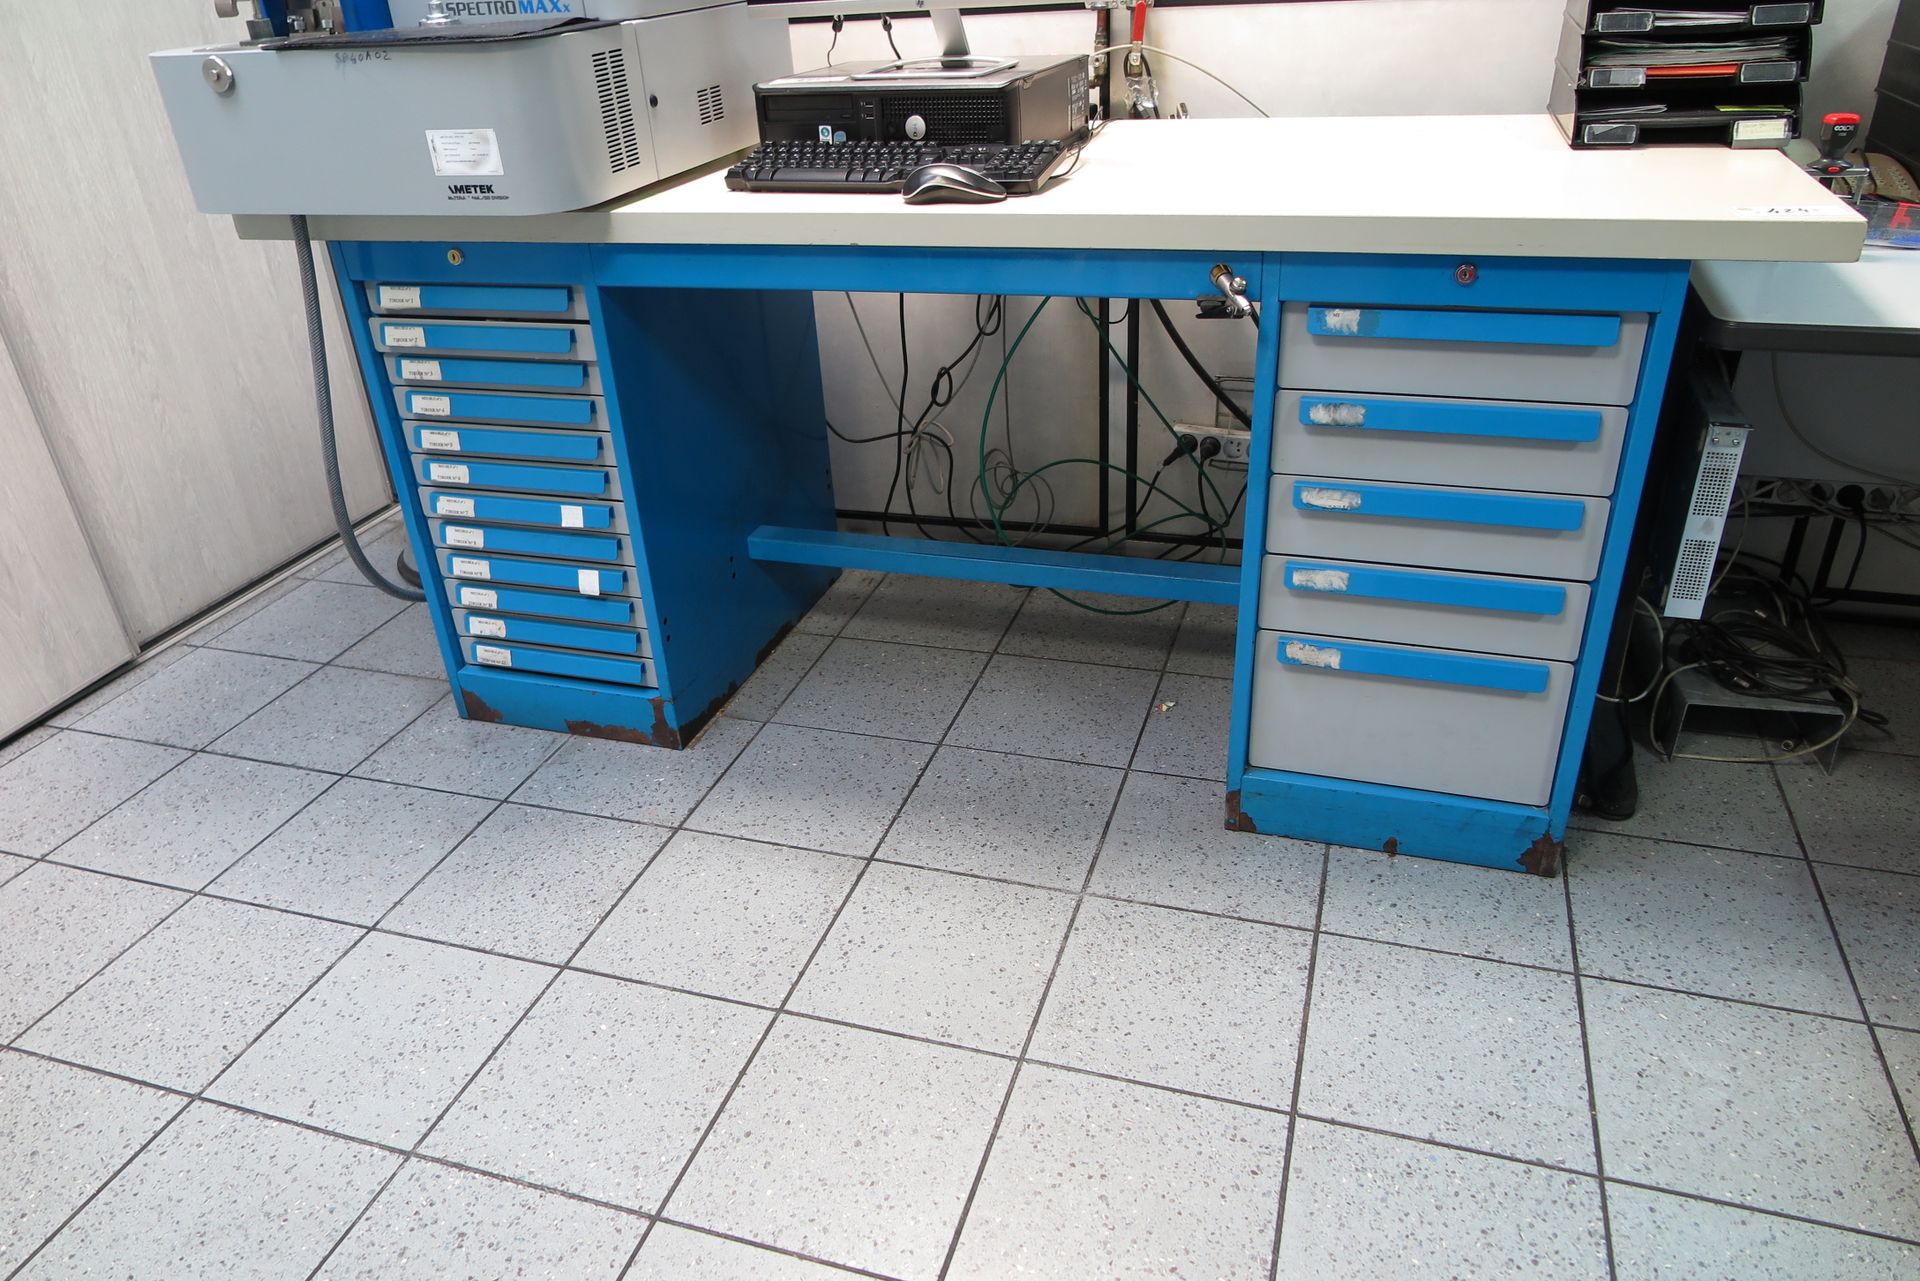 Null 2 metrology workbenches with 17 and 12 drawers